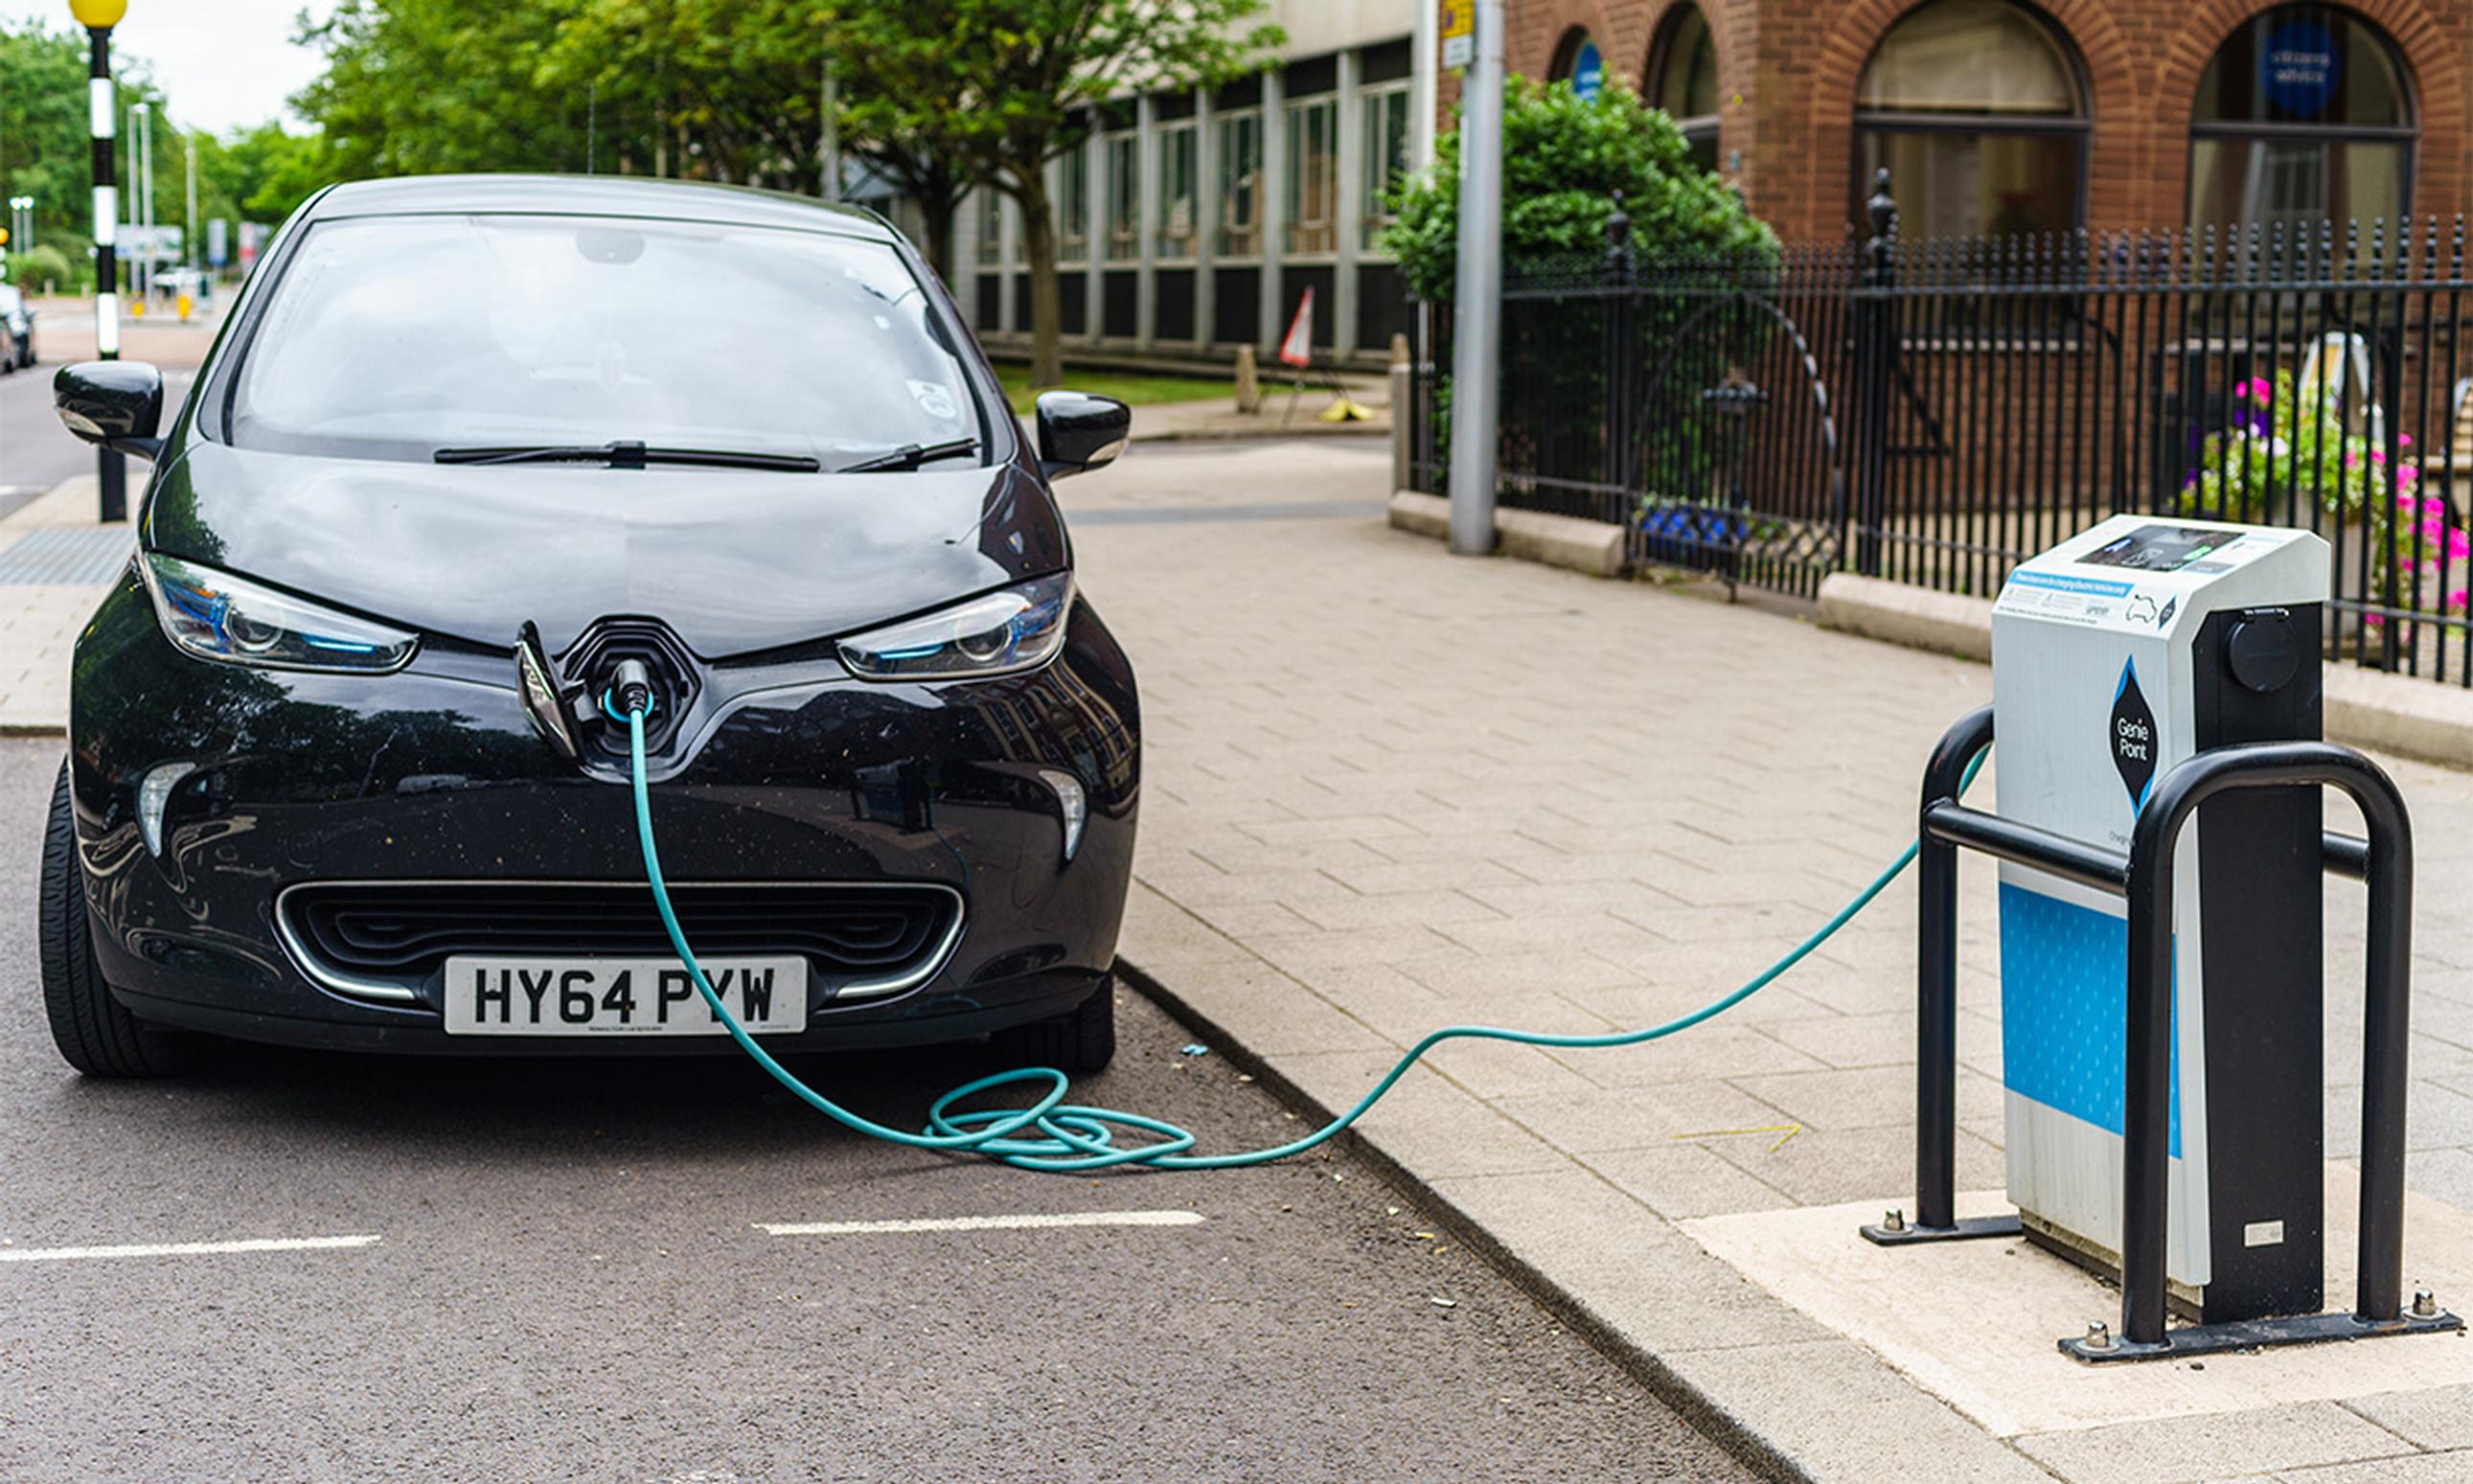 84% of EV drivers currently use public chargers want to be able to pay via contactless bank card to avoid the hassle of paying via multiple apps